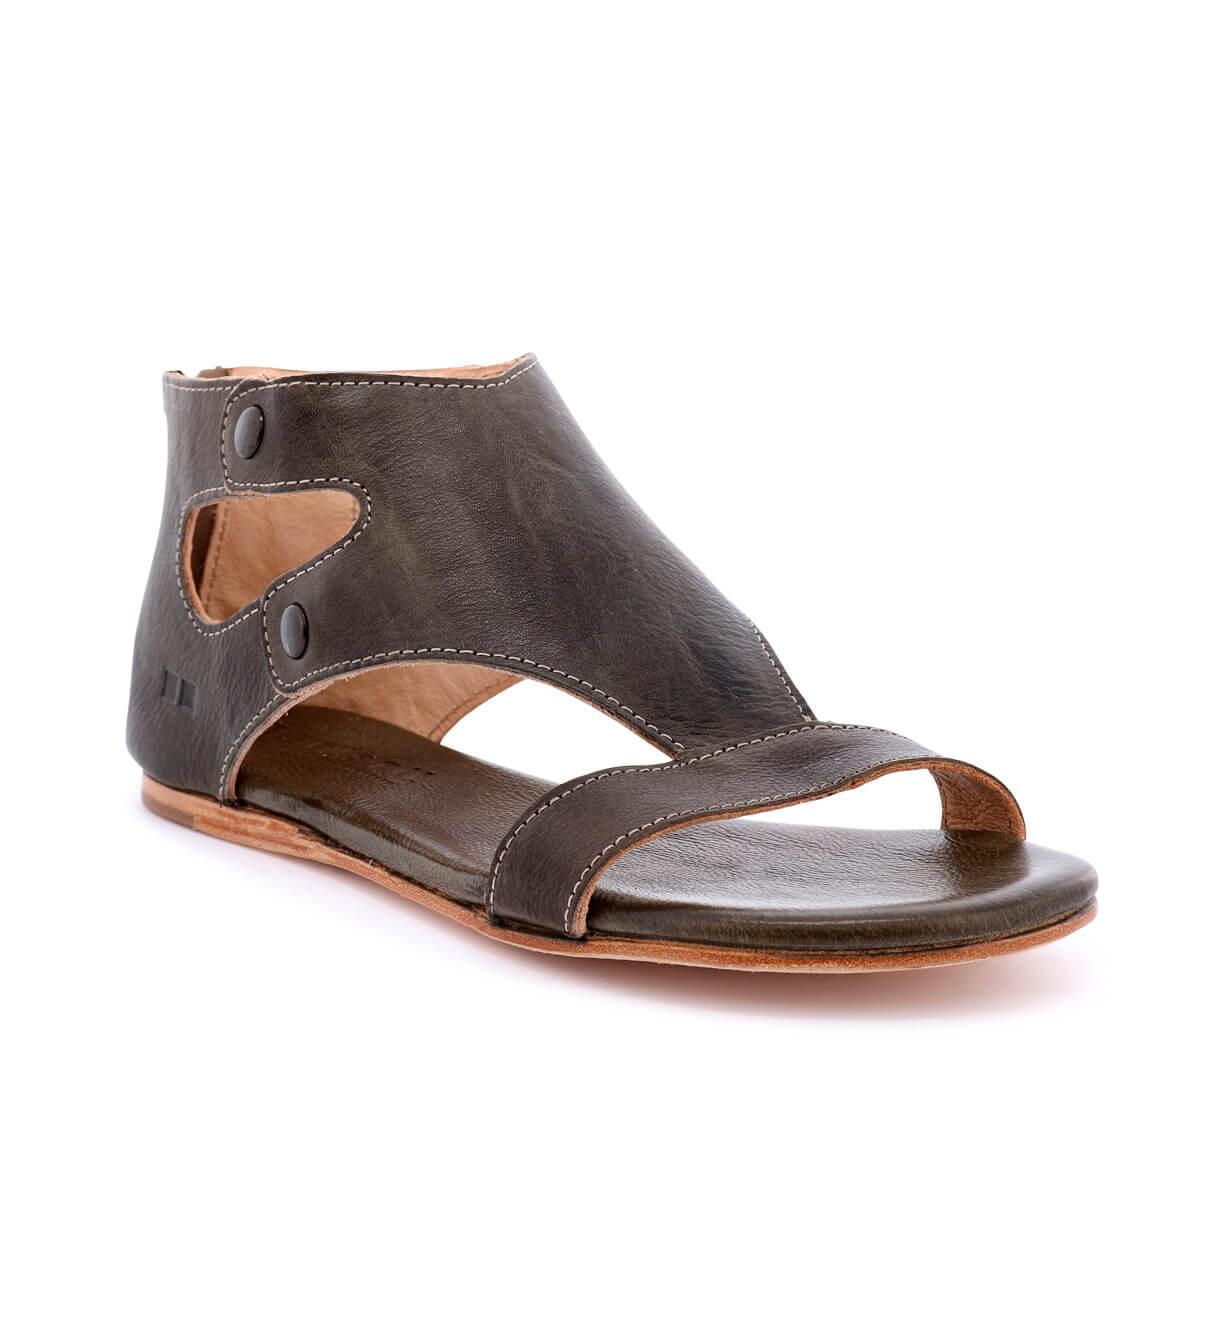 A women's brown leather sandal with two straps, the Soto by Bed Stu.